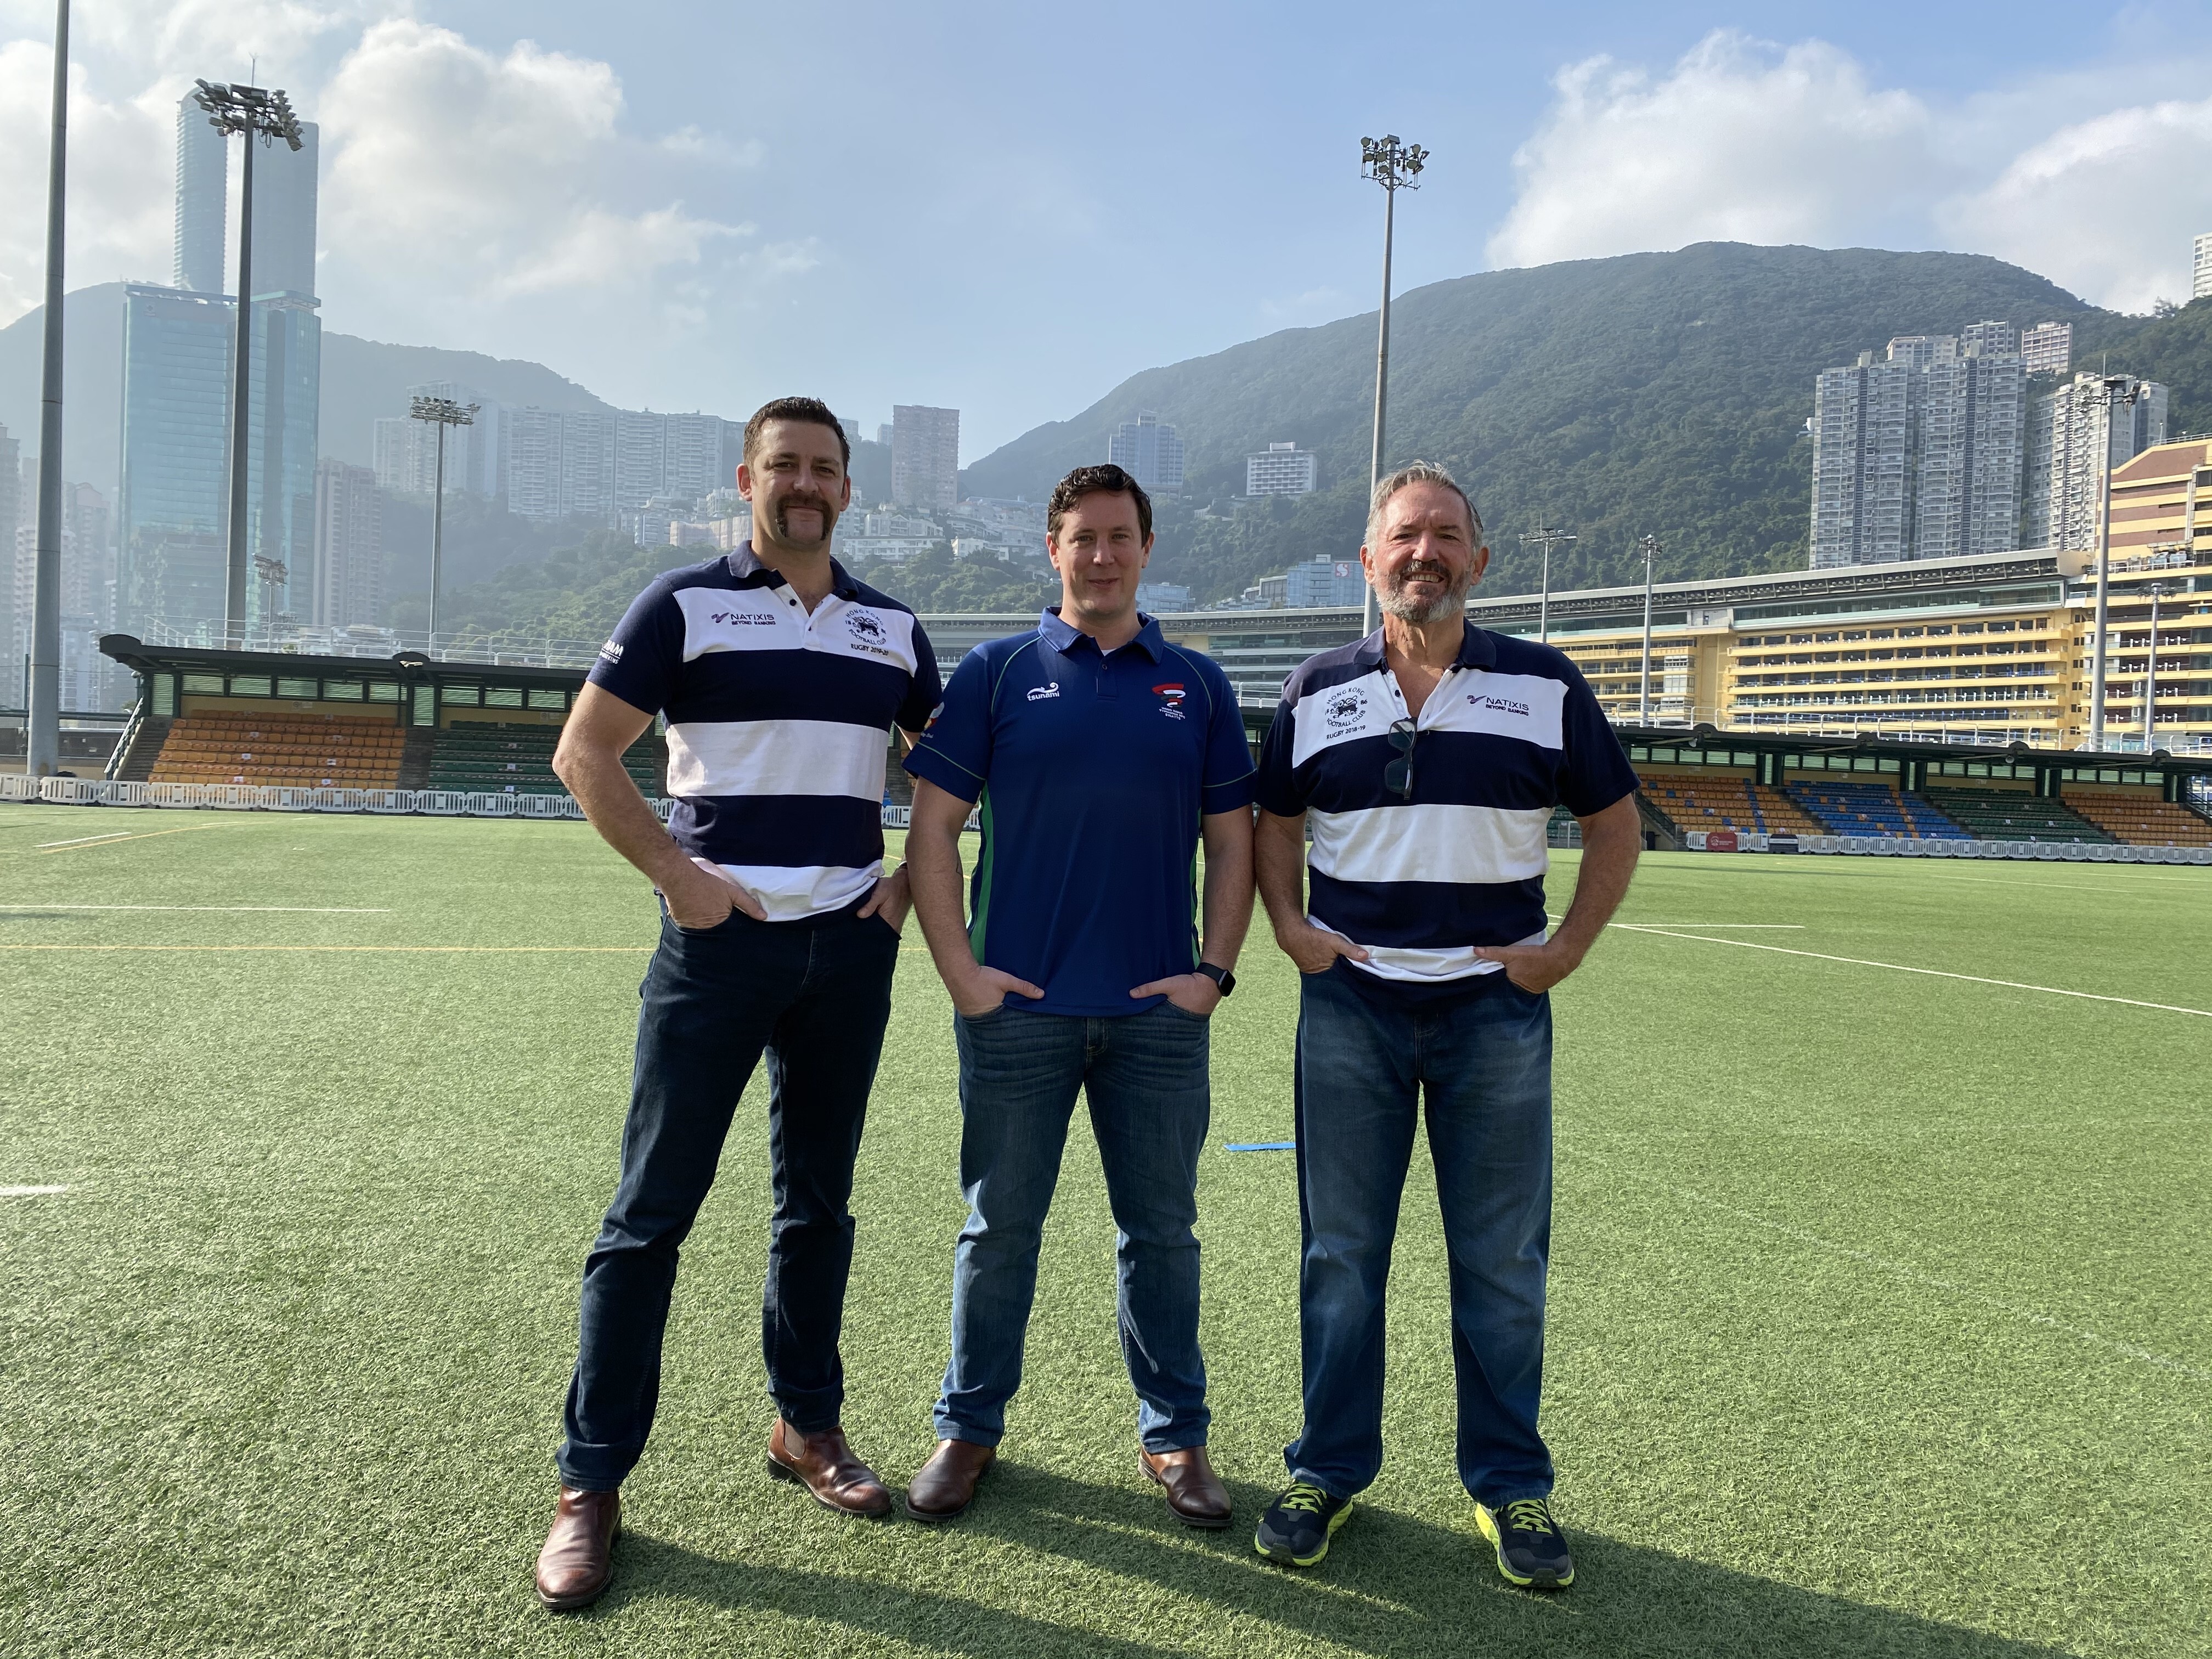 Rugby lads and cancer survivors Gareth Wilde, James Swatton and Terry Hart want to dispel men's health stigma in Hong Kong. Photo: Handout